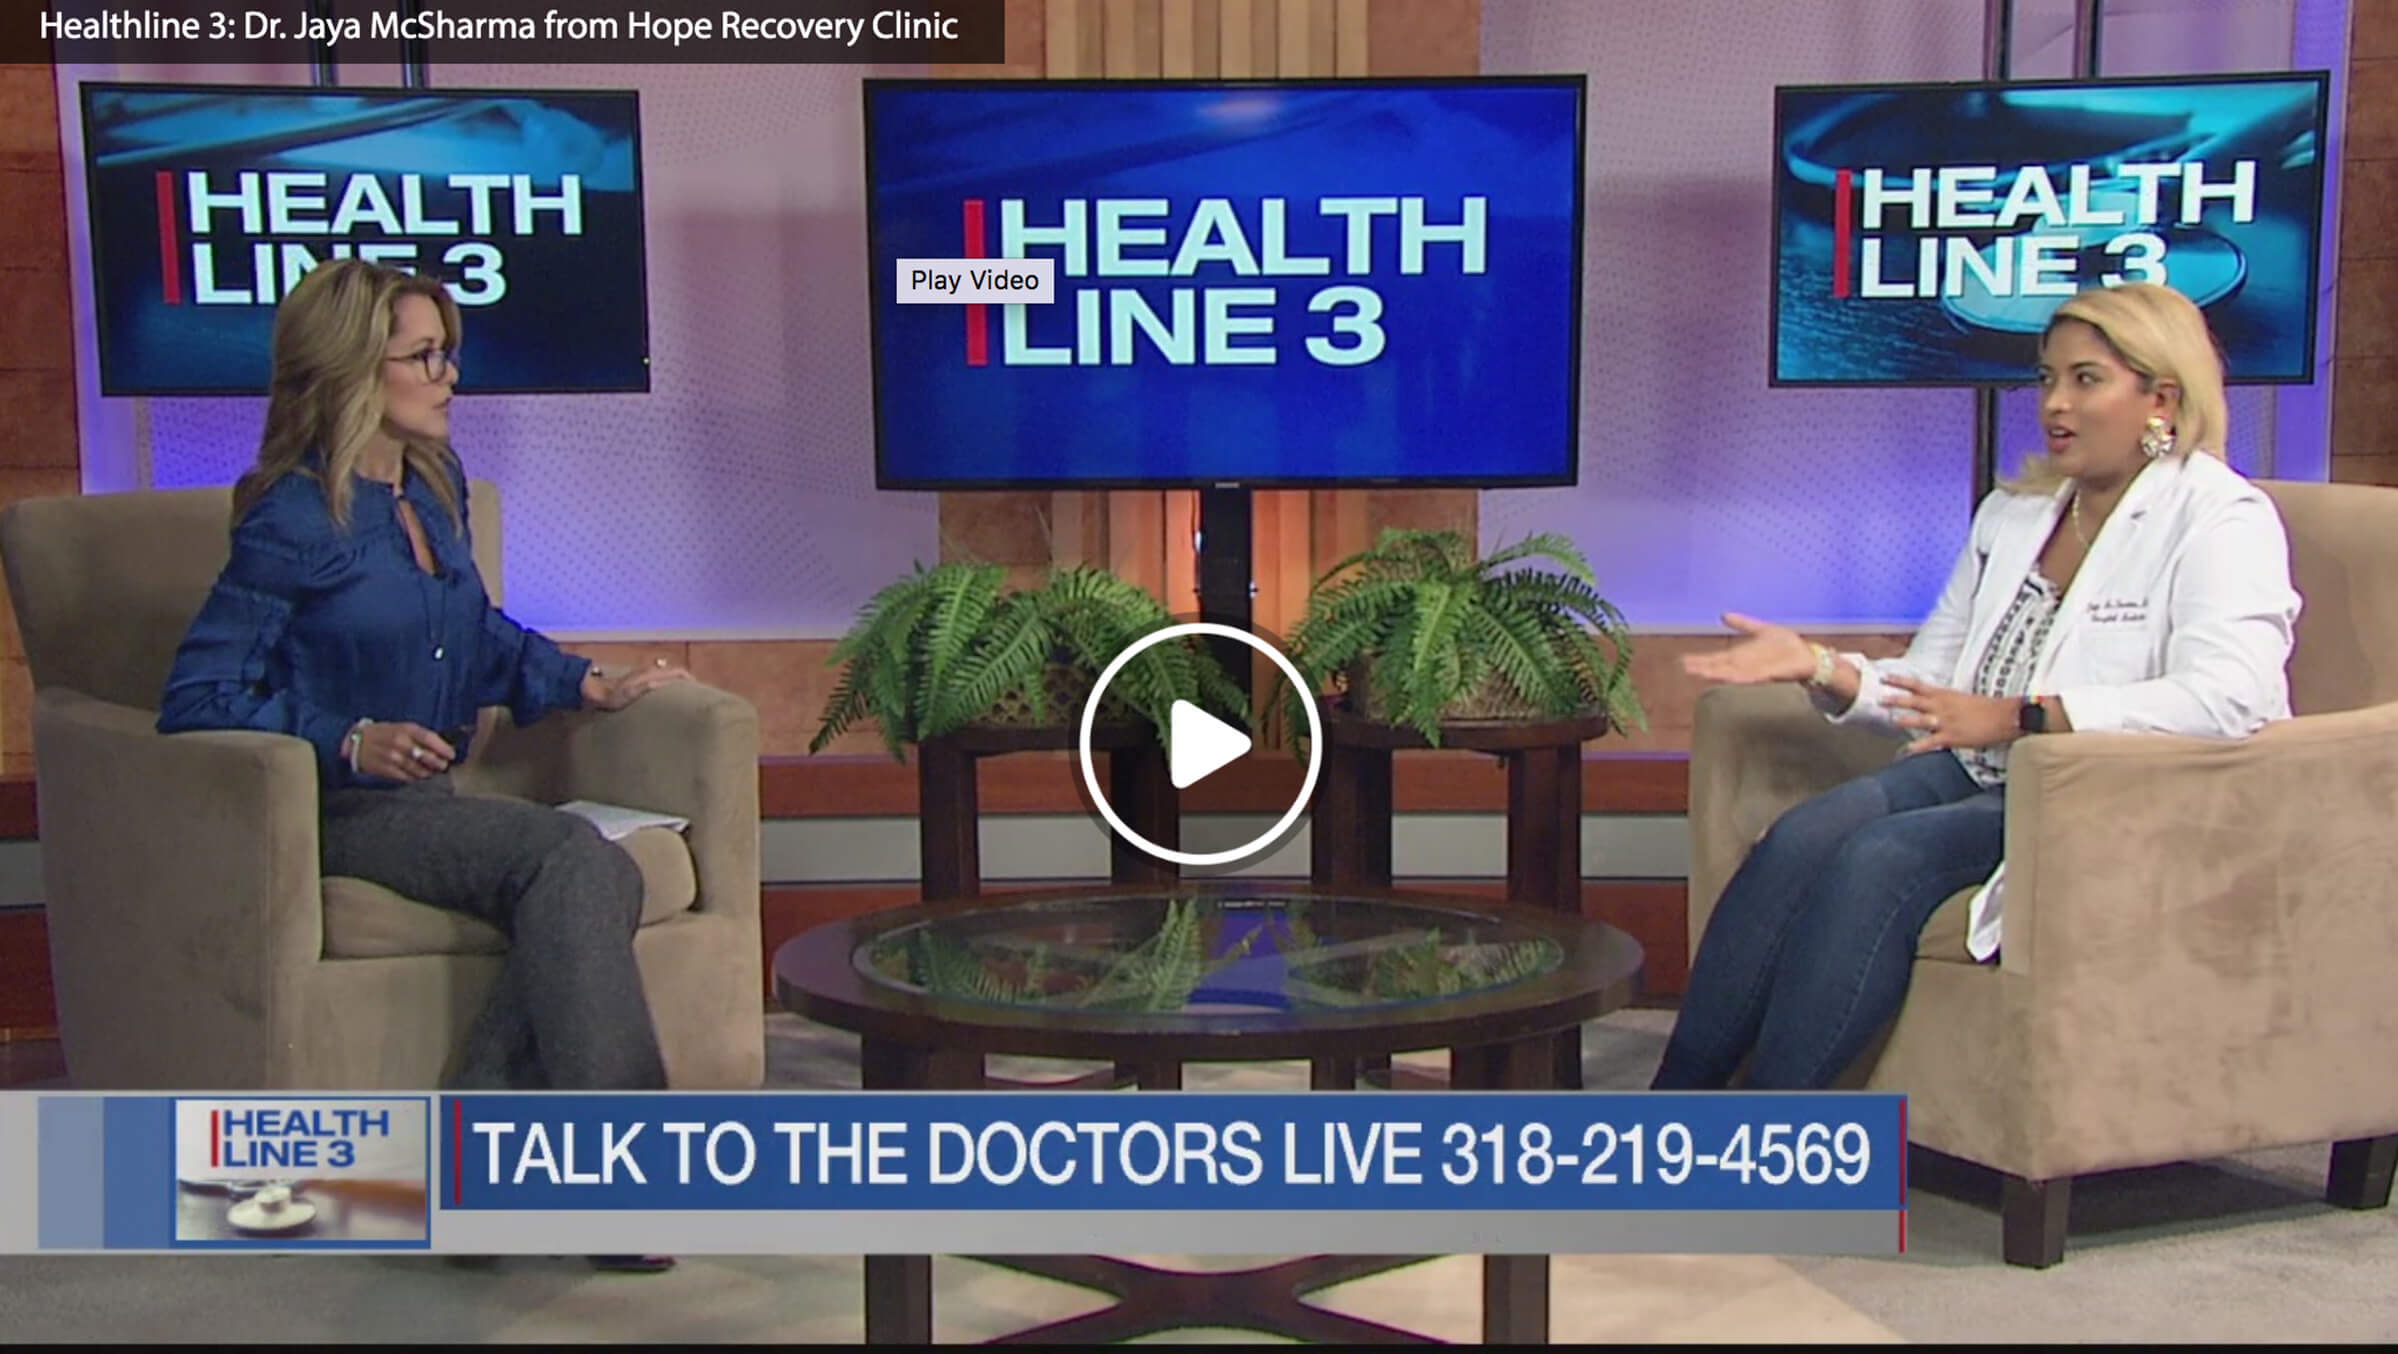 Featured image for “Healthline 3 Interview”